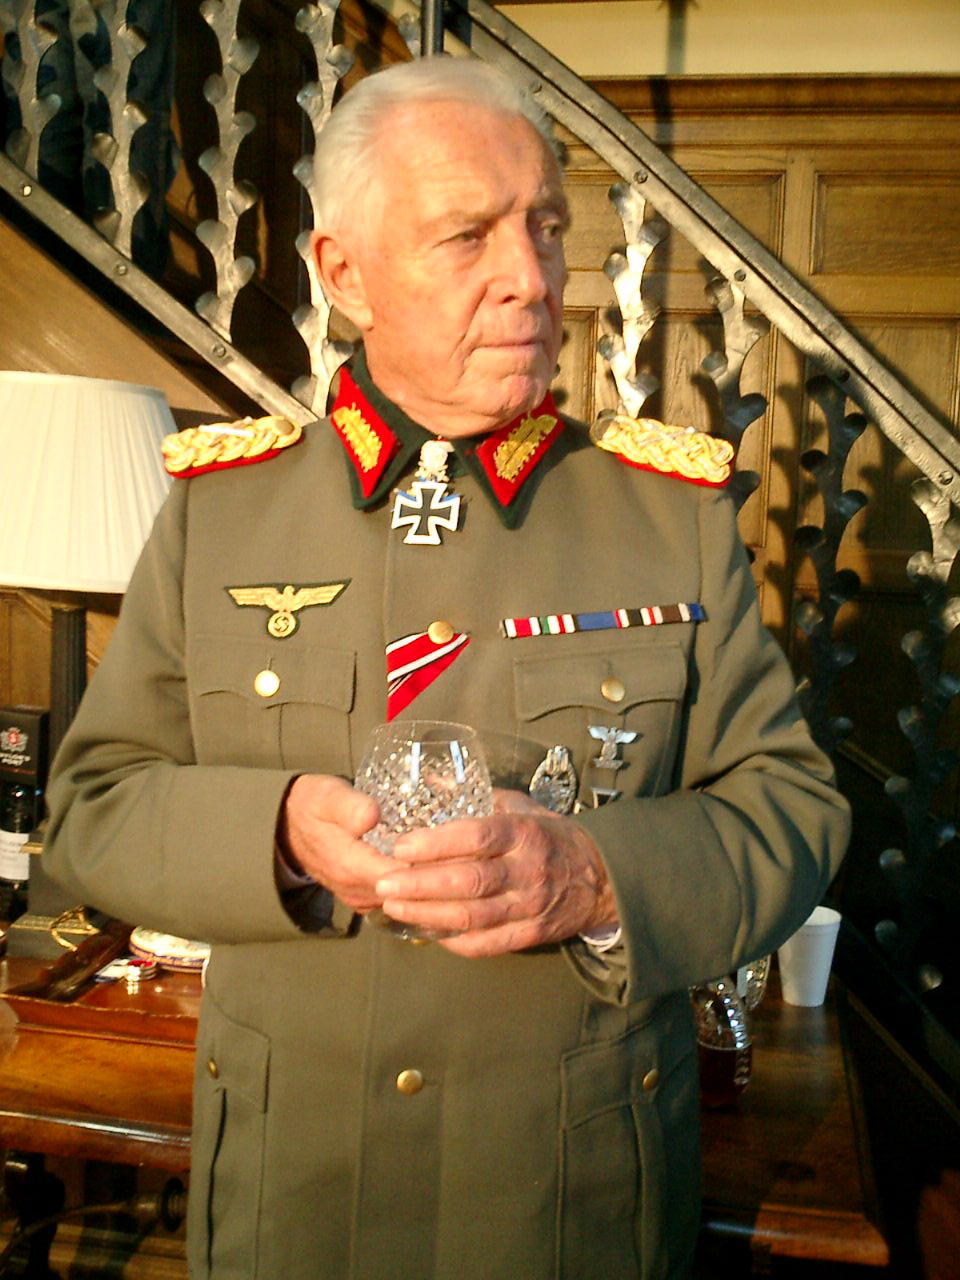 Portraying the german war hero Field Marshall Erwin Rommel in the PATRICIDE